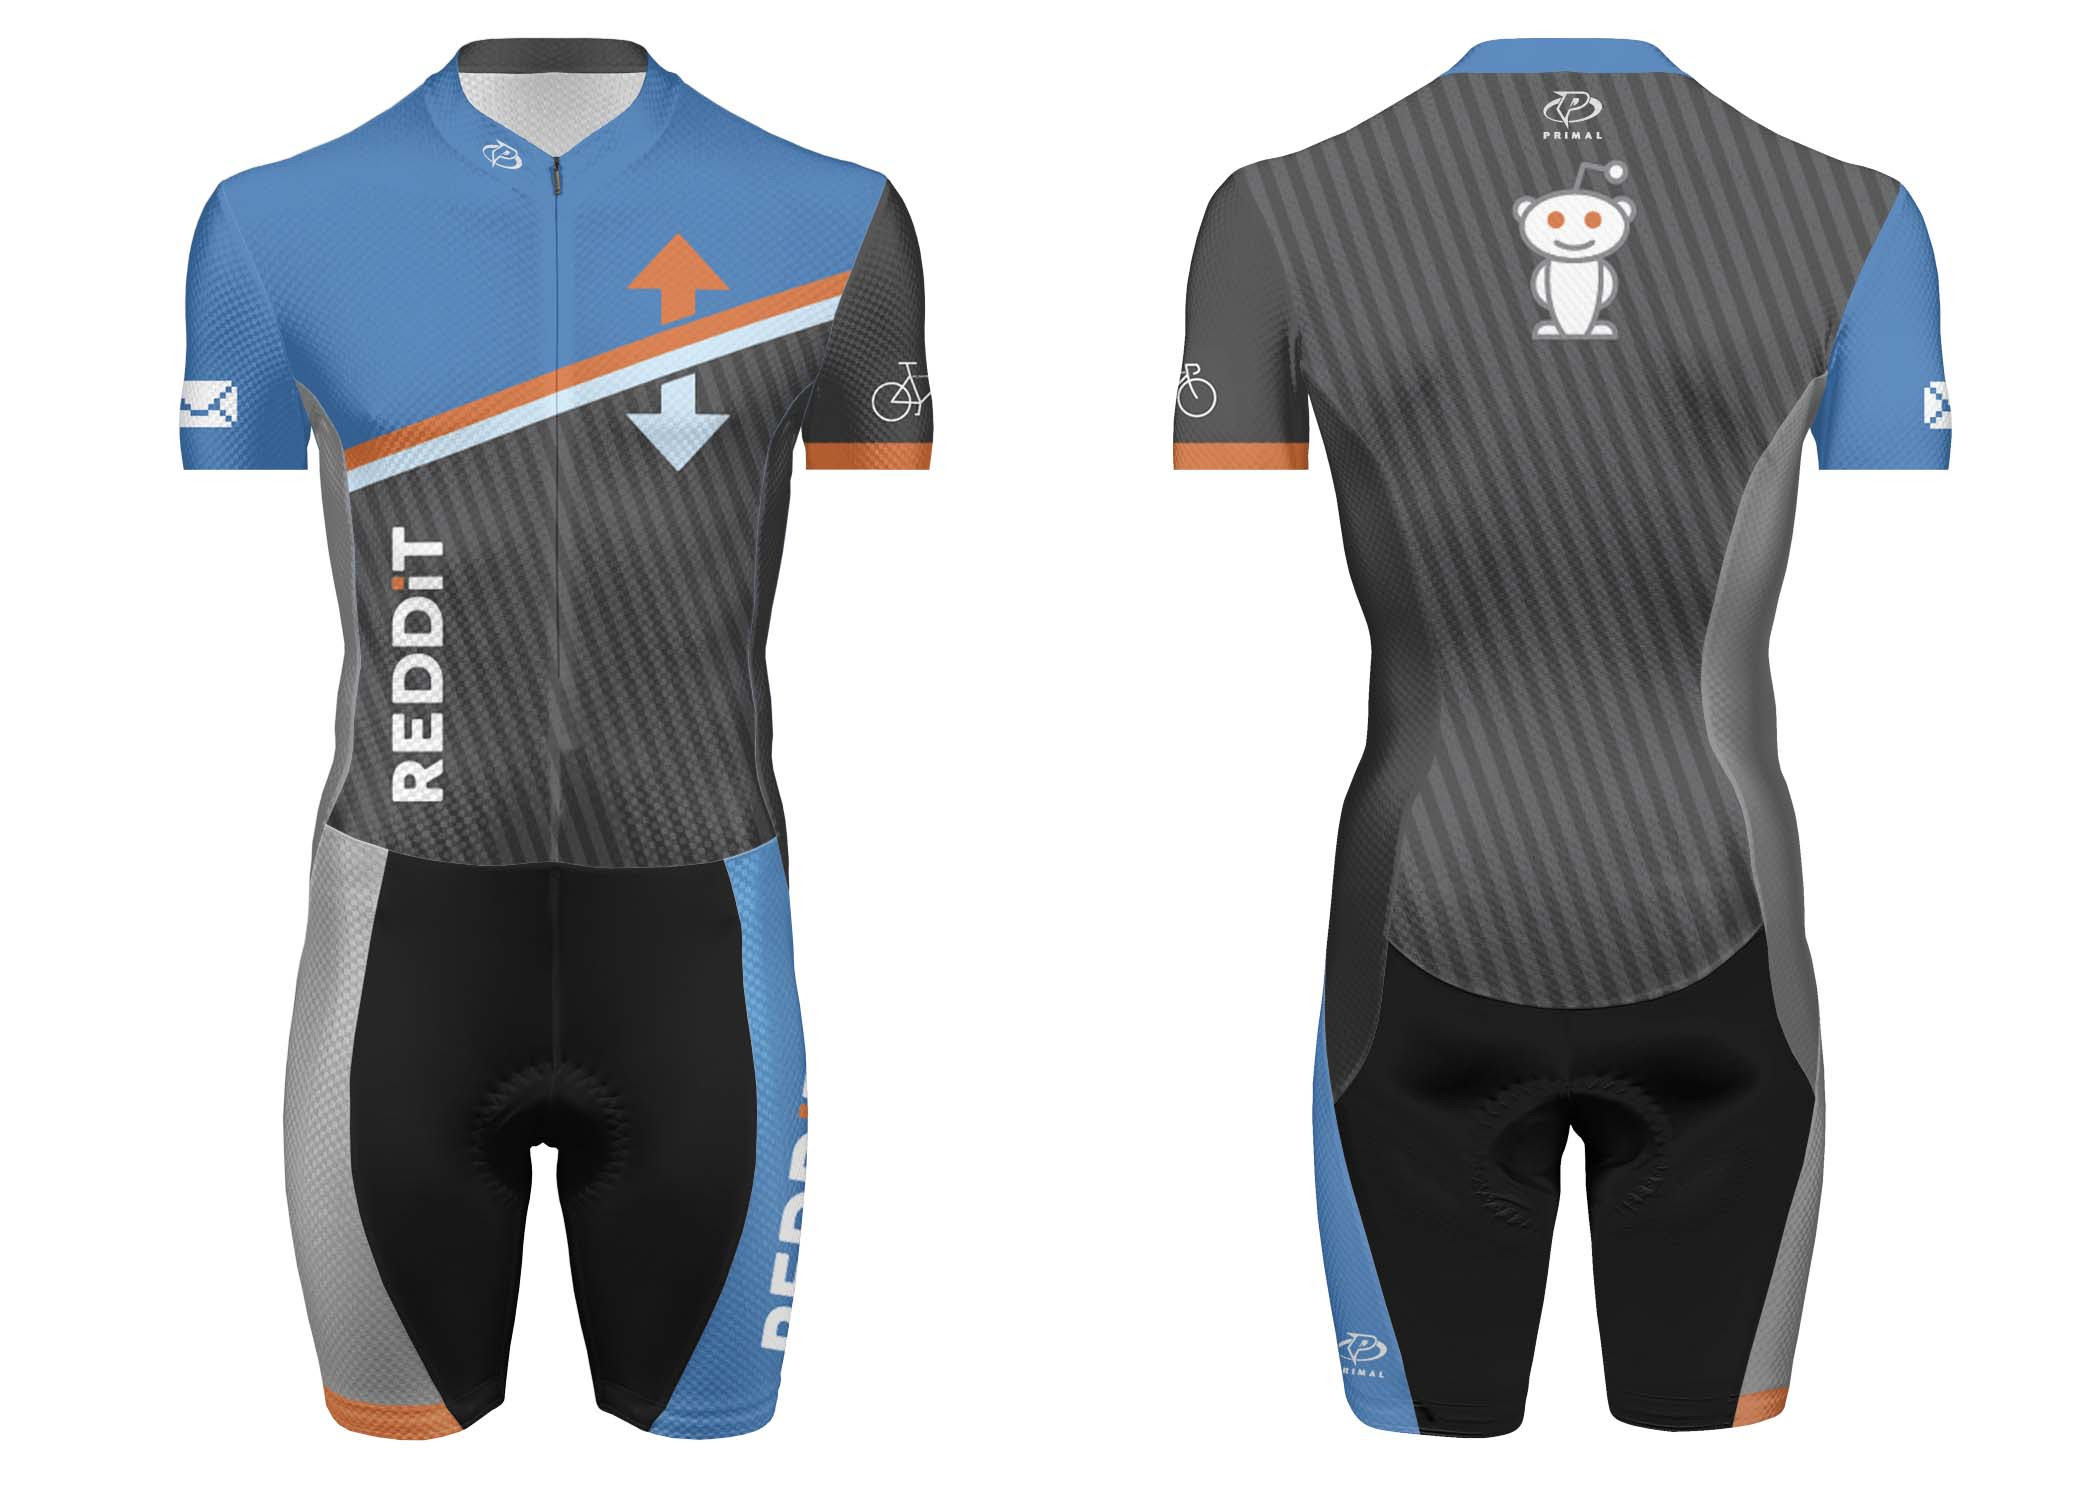 Download 15+ Mens Tri Skinsuit Mockup Gif Yellowimages - Free PSD ...